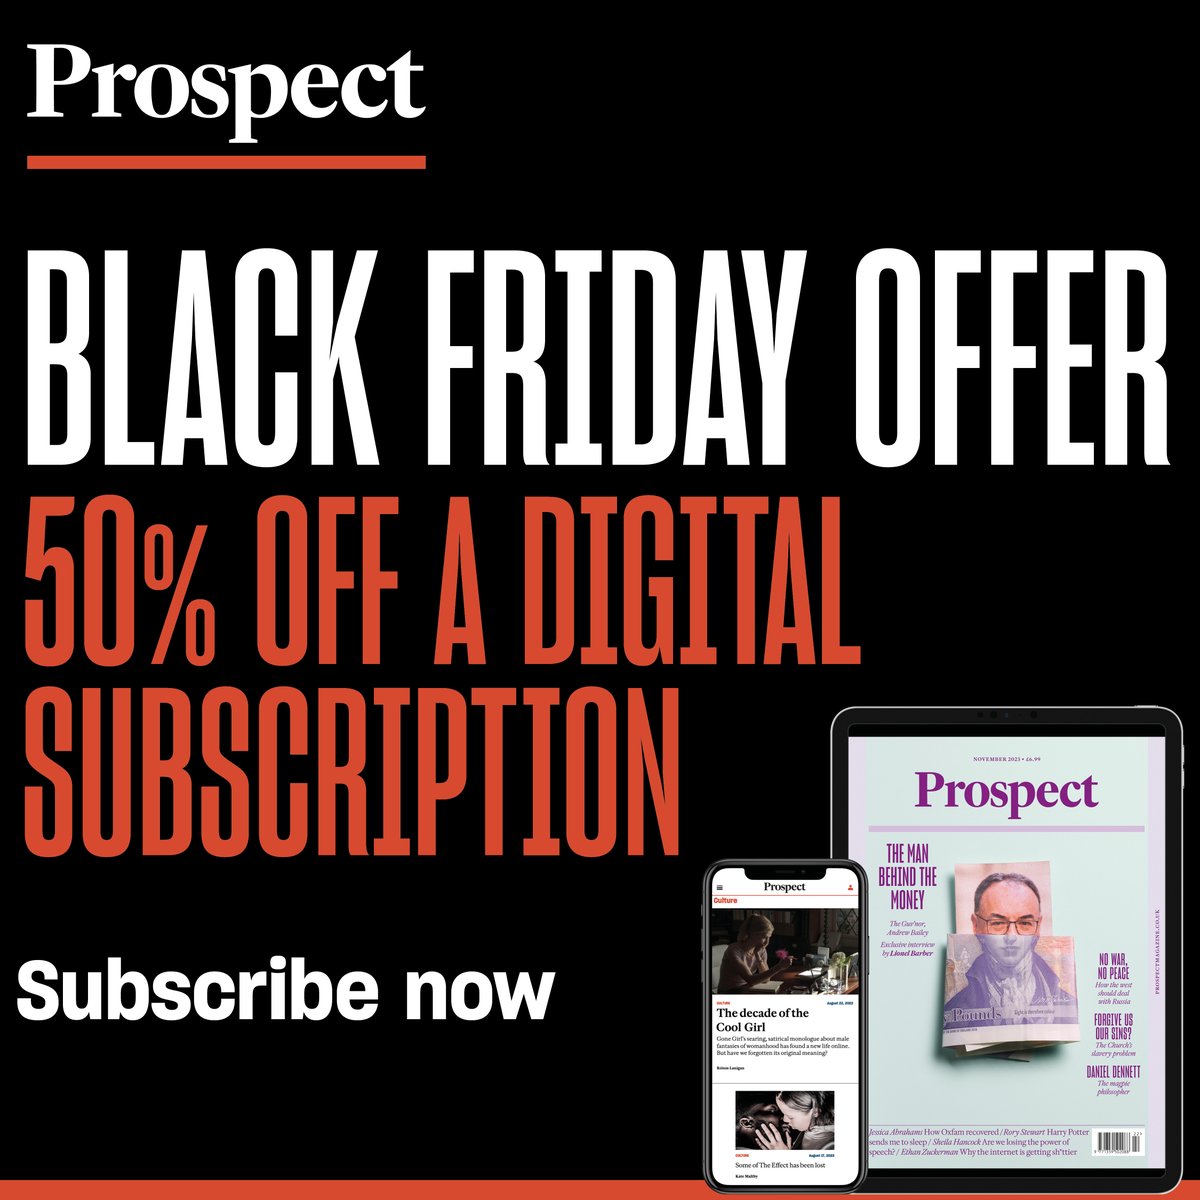 If you’ve ever toyed with the idea of subscribing to @prospect_uk today would be a very good day to do so.   You can get 50% off a digital subscription and escape,the echo chamber for a year